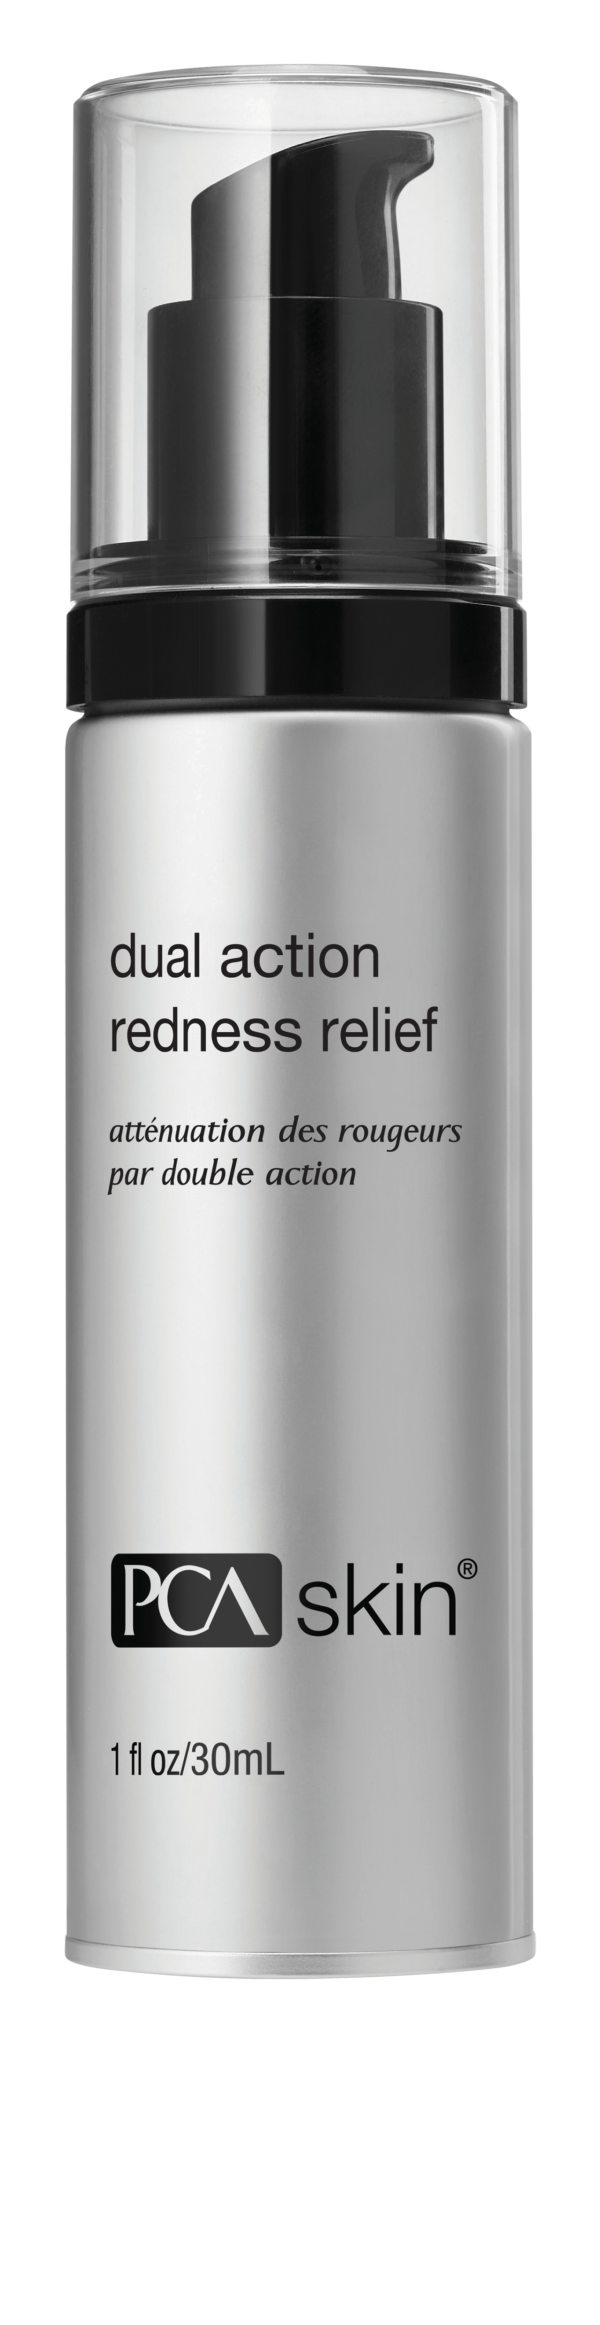 PCA_Skin_Dual_Action_Redness_Relief